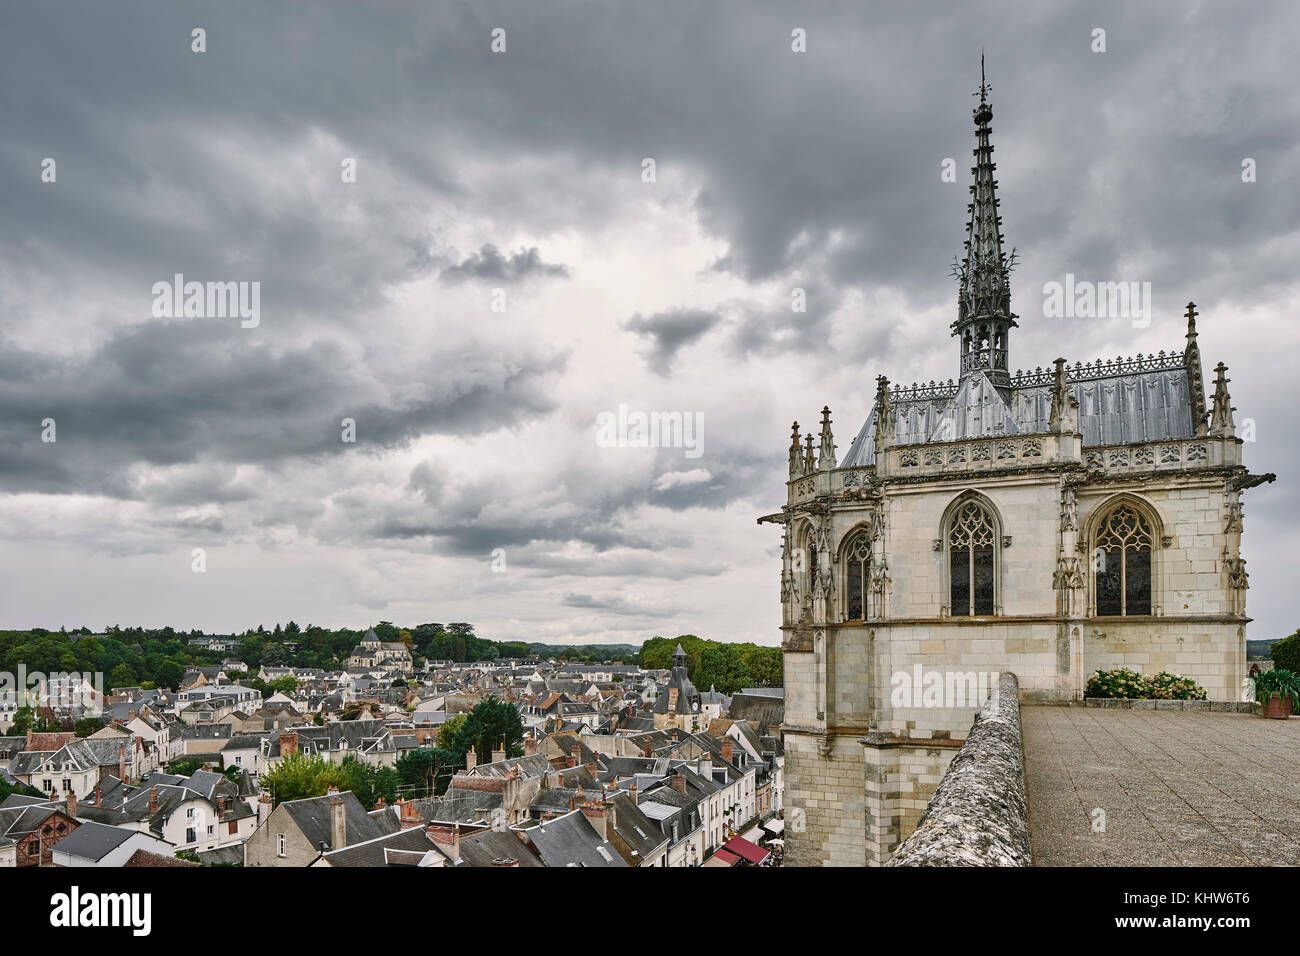 Elevated view of rooftops and Saint Hubert Chapel where Da Vinci is buried, Amboise, Loire Valley, France Stock Photo